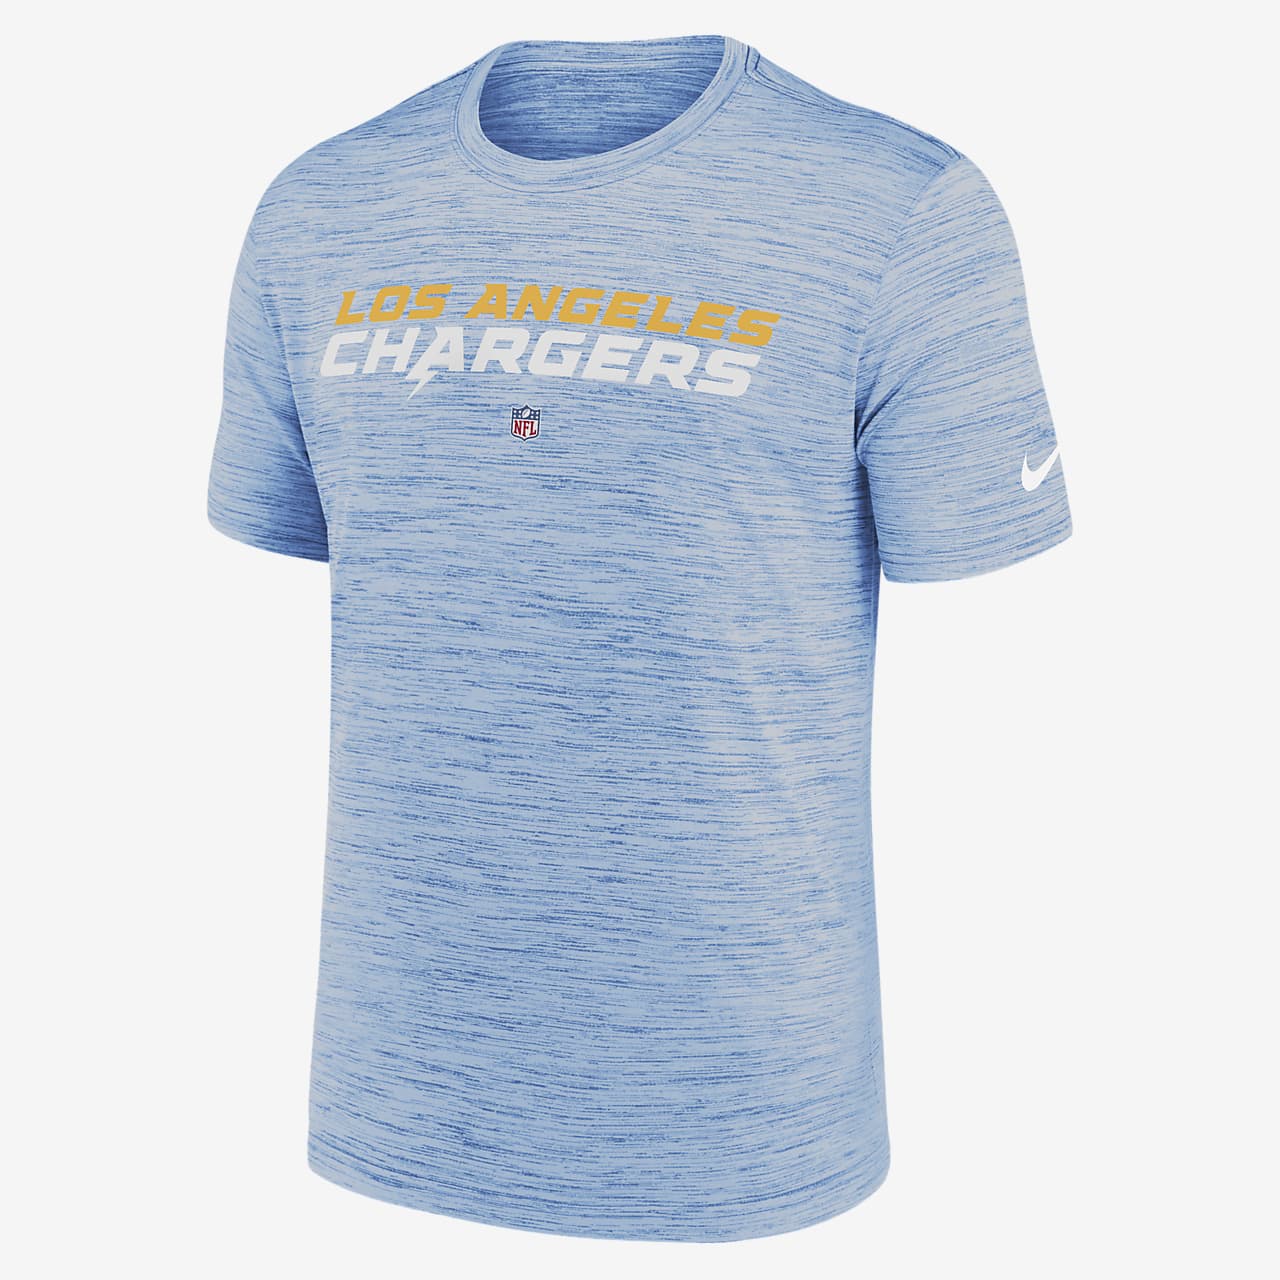 Nike Dri-FIT Sideline Velocity (NFL Los Angeles Chargers) Women's T-Shirt